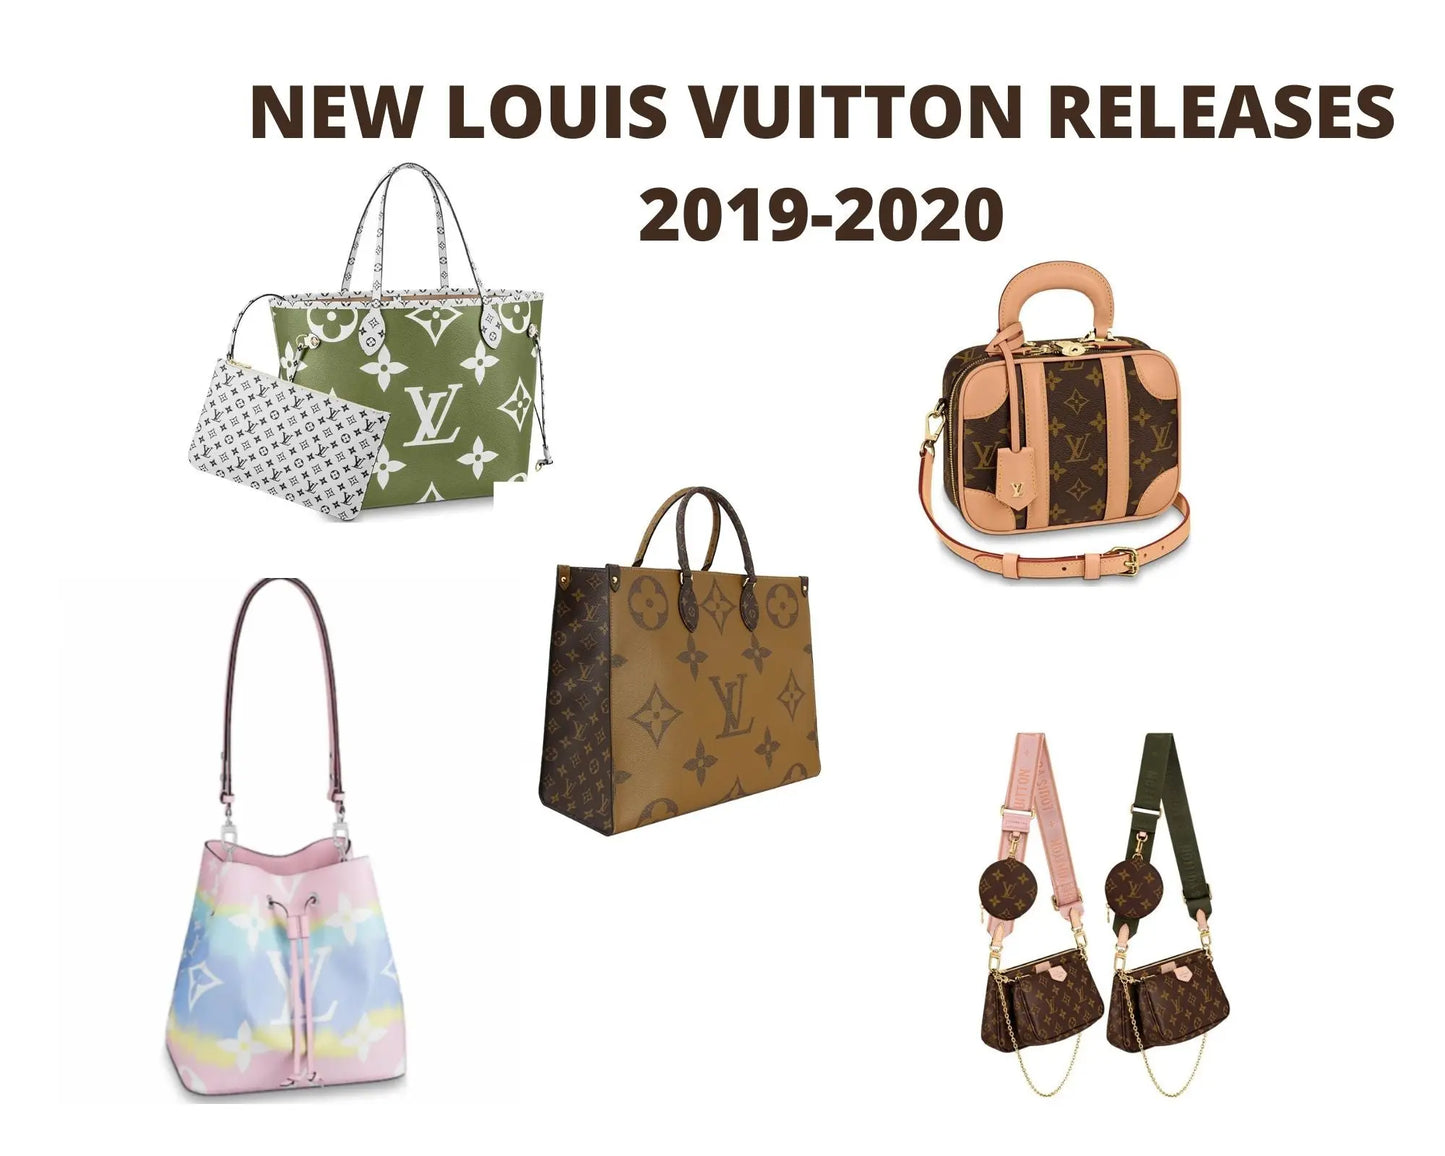 Louis Vuitton New Releases & Collector Must-Have 2019/2020